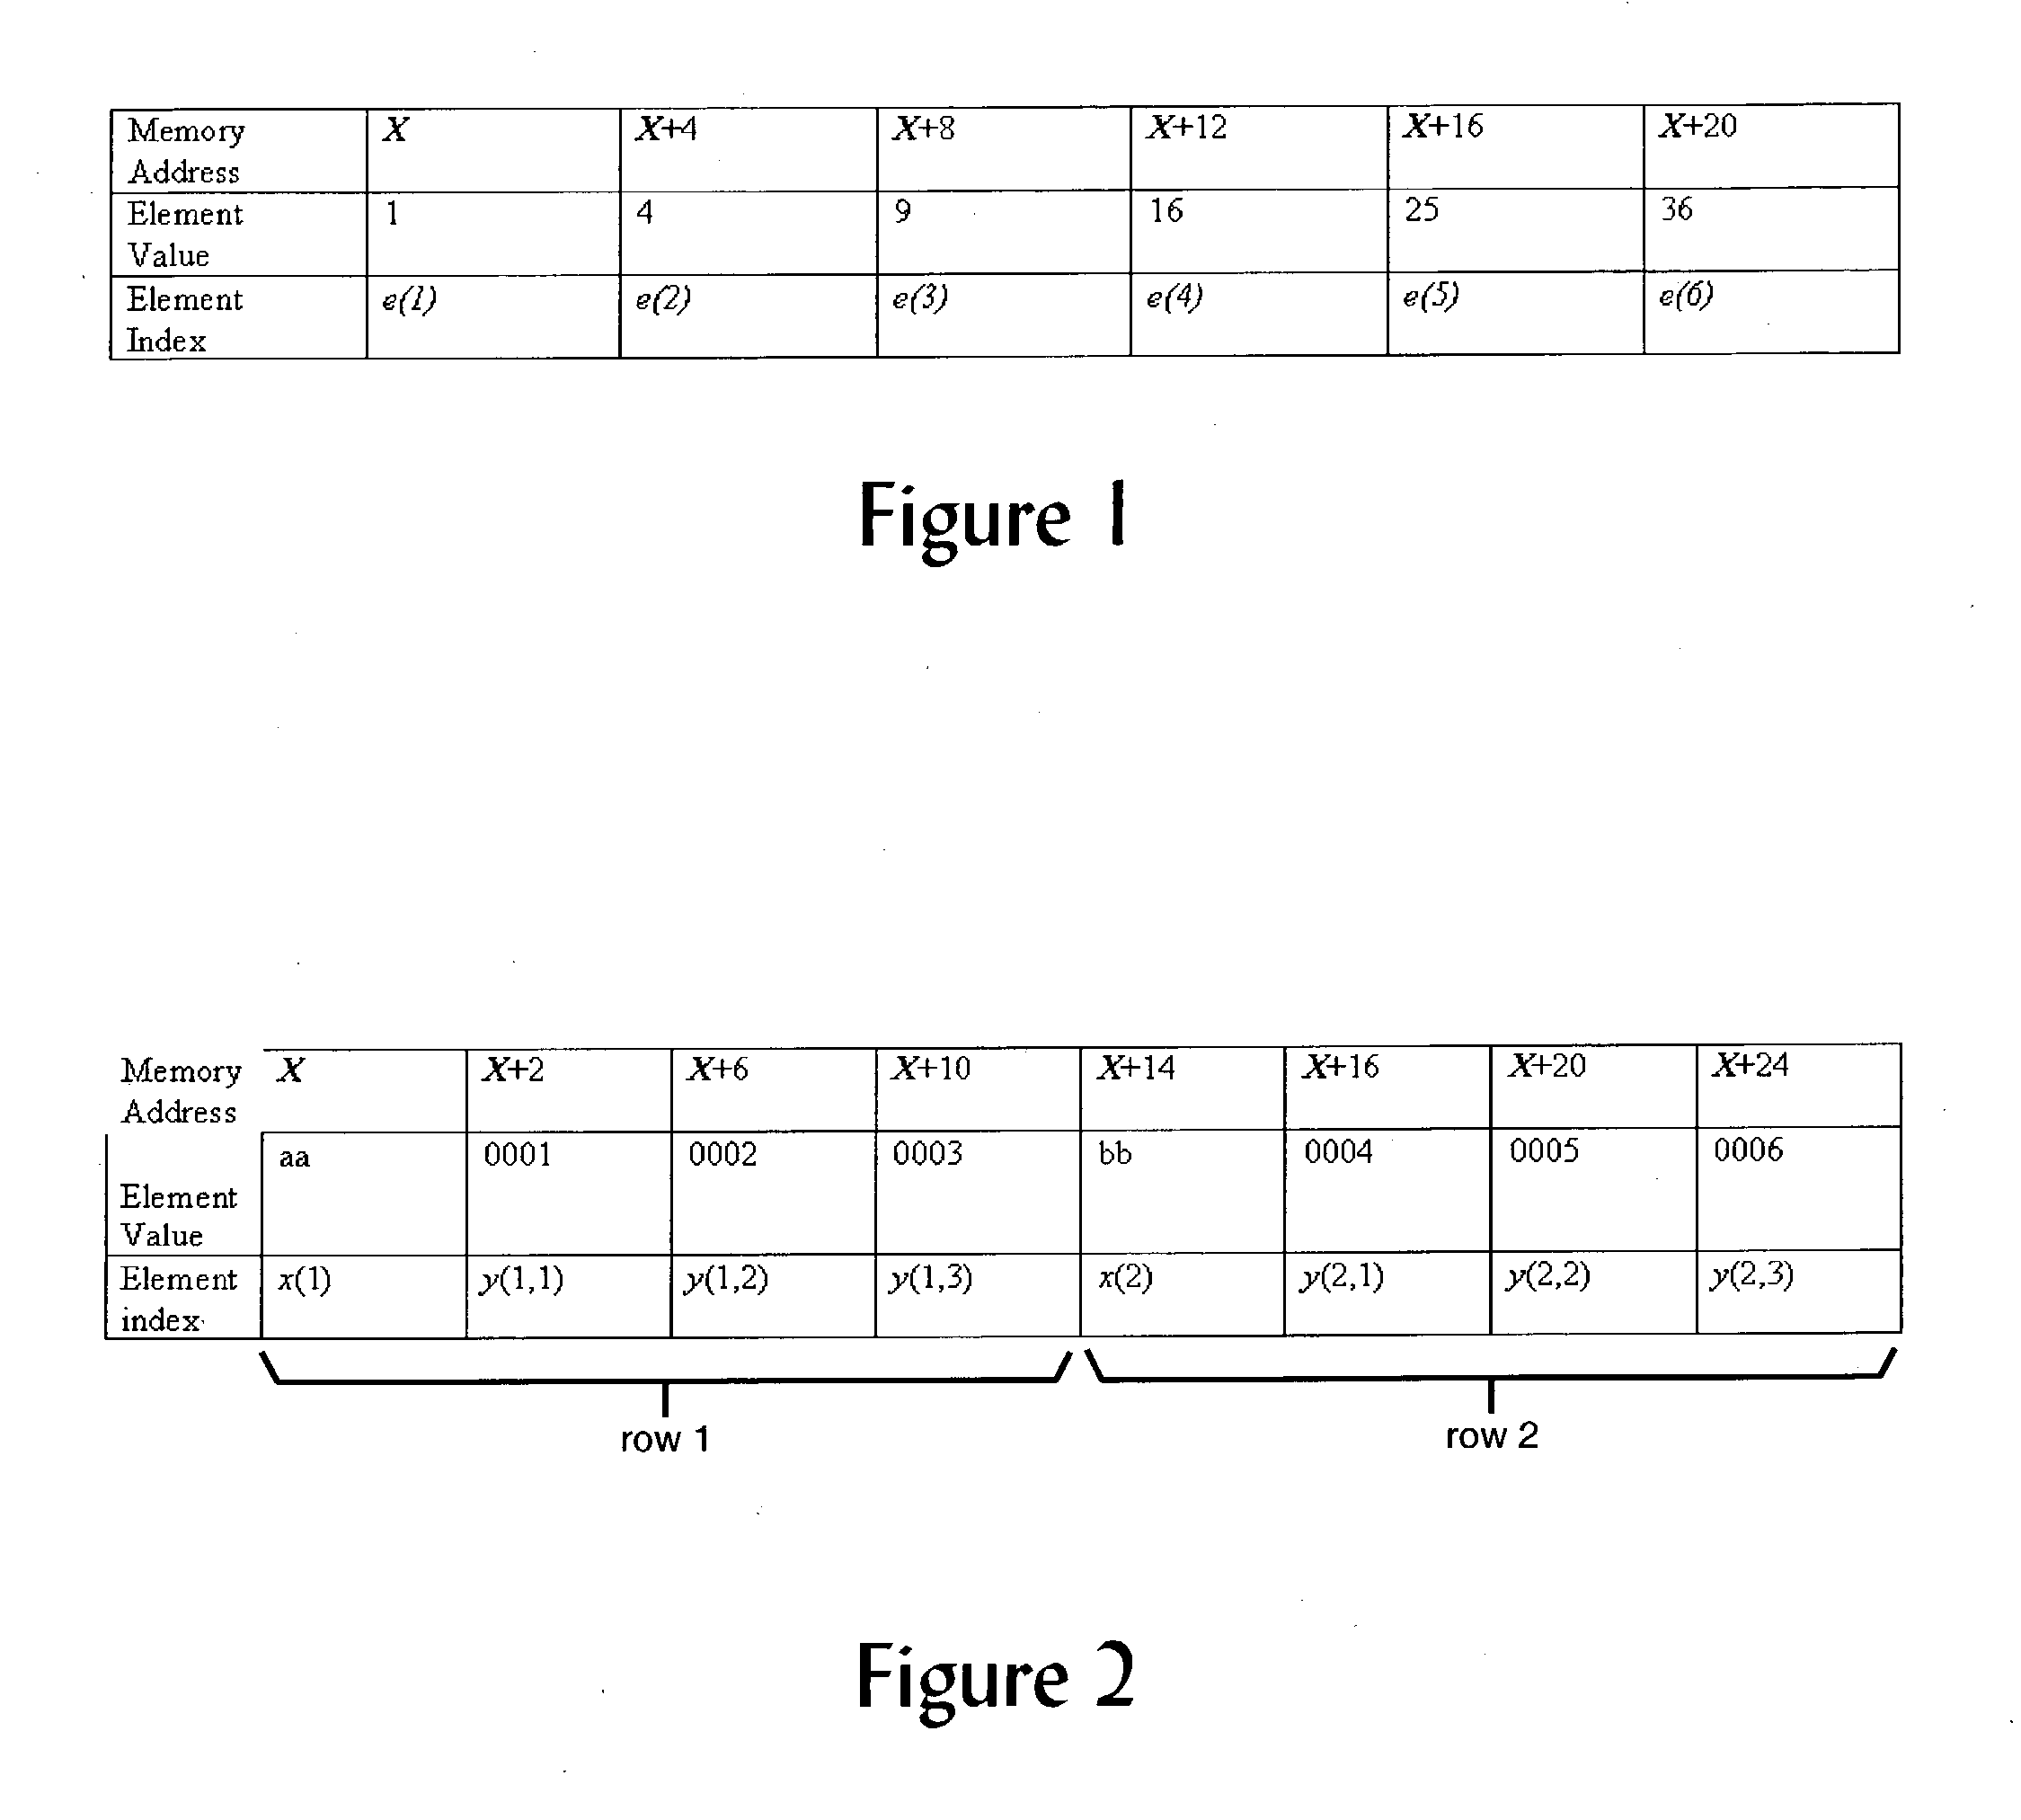 Tilting tree spinning cones method and system for mapping XML to n-dimensional data structure using a single dimensional mapping array